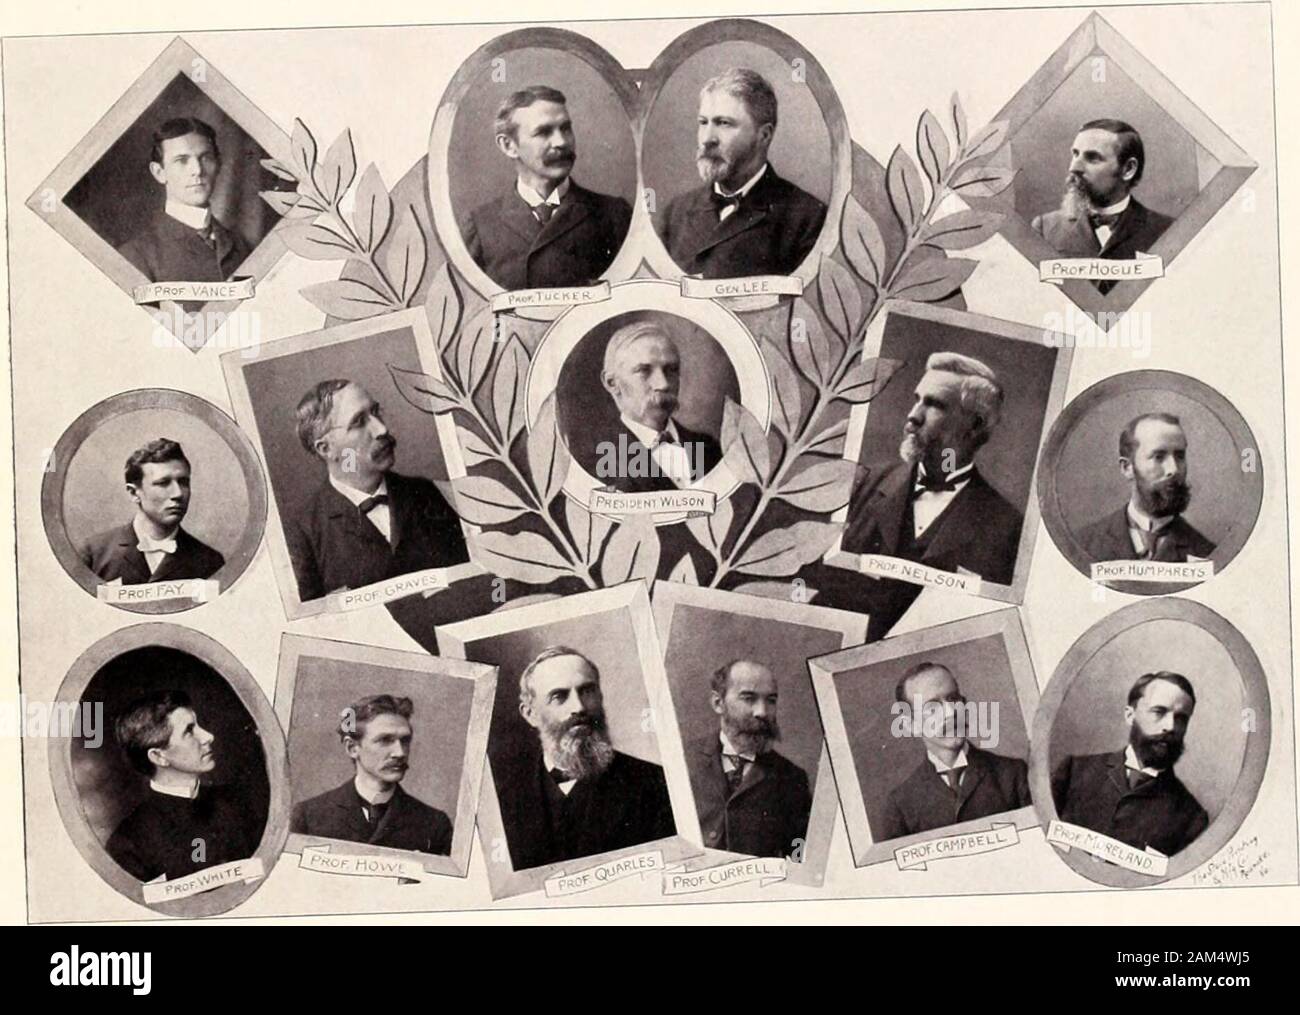 Calyx . les Alfred Graves, M. A., LL. D., 1875, Dean of the Law Faculty, and Professor of Common and Statute Law. Sidney Turner Moreland, M. A., C. E., 1880,McCormick Professor of P/ivsics. J.MES Addison Ouarles, D. D., LL. D., 1886,Professor of P/iilosophy. Henry Don.ild Cajipbell, M. A., Ph. D., 1887,Robinson Professor of Geology and Biology. David Carlisle Humphreys, C. E., 1889,Thomas A. Scott Professor of Civil Engineering. Henry Alexander White, M. A., Ph. D., D. D. 1889, Professor of History. Addison Hogue, 1893, Corcoran Professor of Greek. Edwin Whitfield F.y, ]I. A., Ph. D,, 1893, Stock Photo